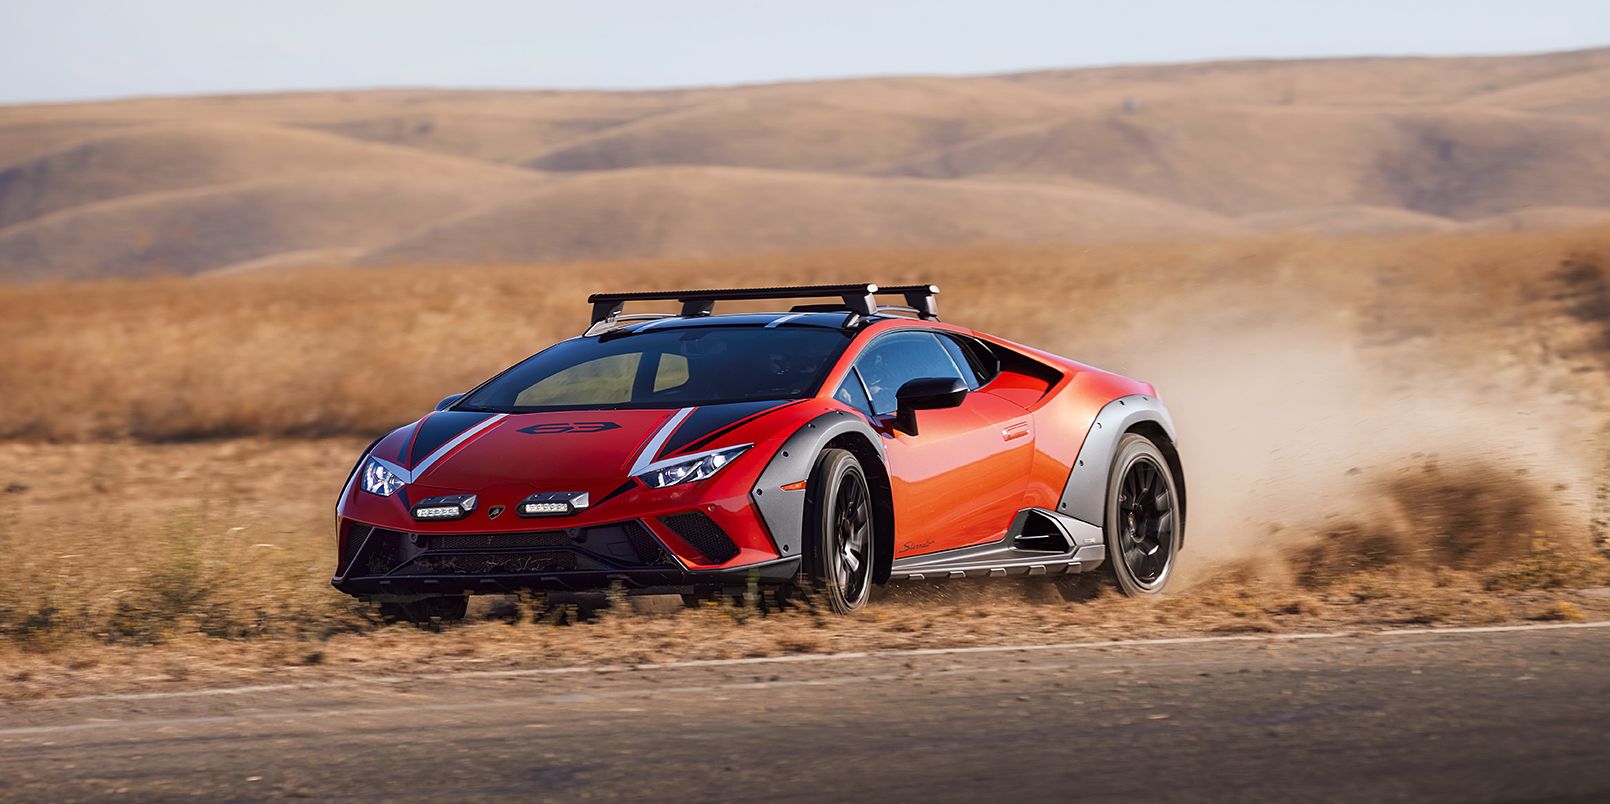 Counterpoint: The Lamborghini Huracán Sterrato Deserved to Win Performance Car of the Year